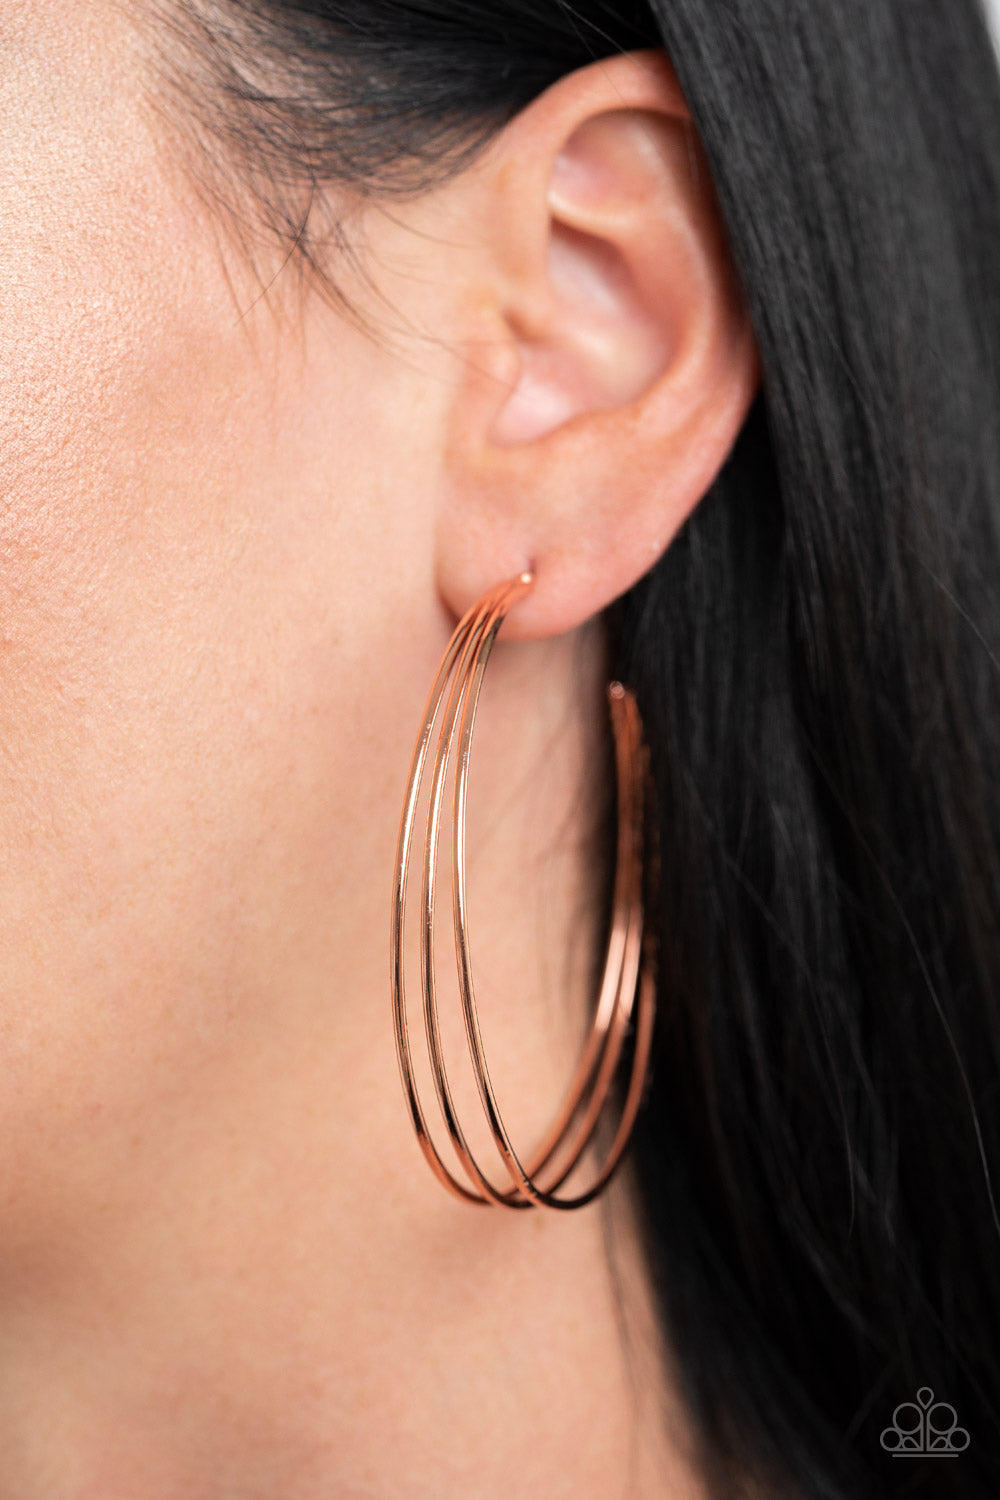 Rimmed Radiance Copper Hoop Earring - Paparazzi Accessories